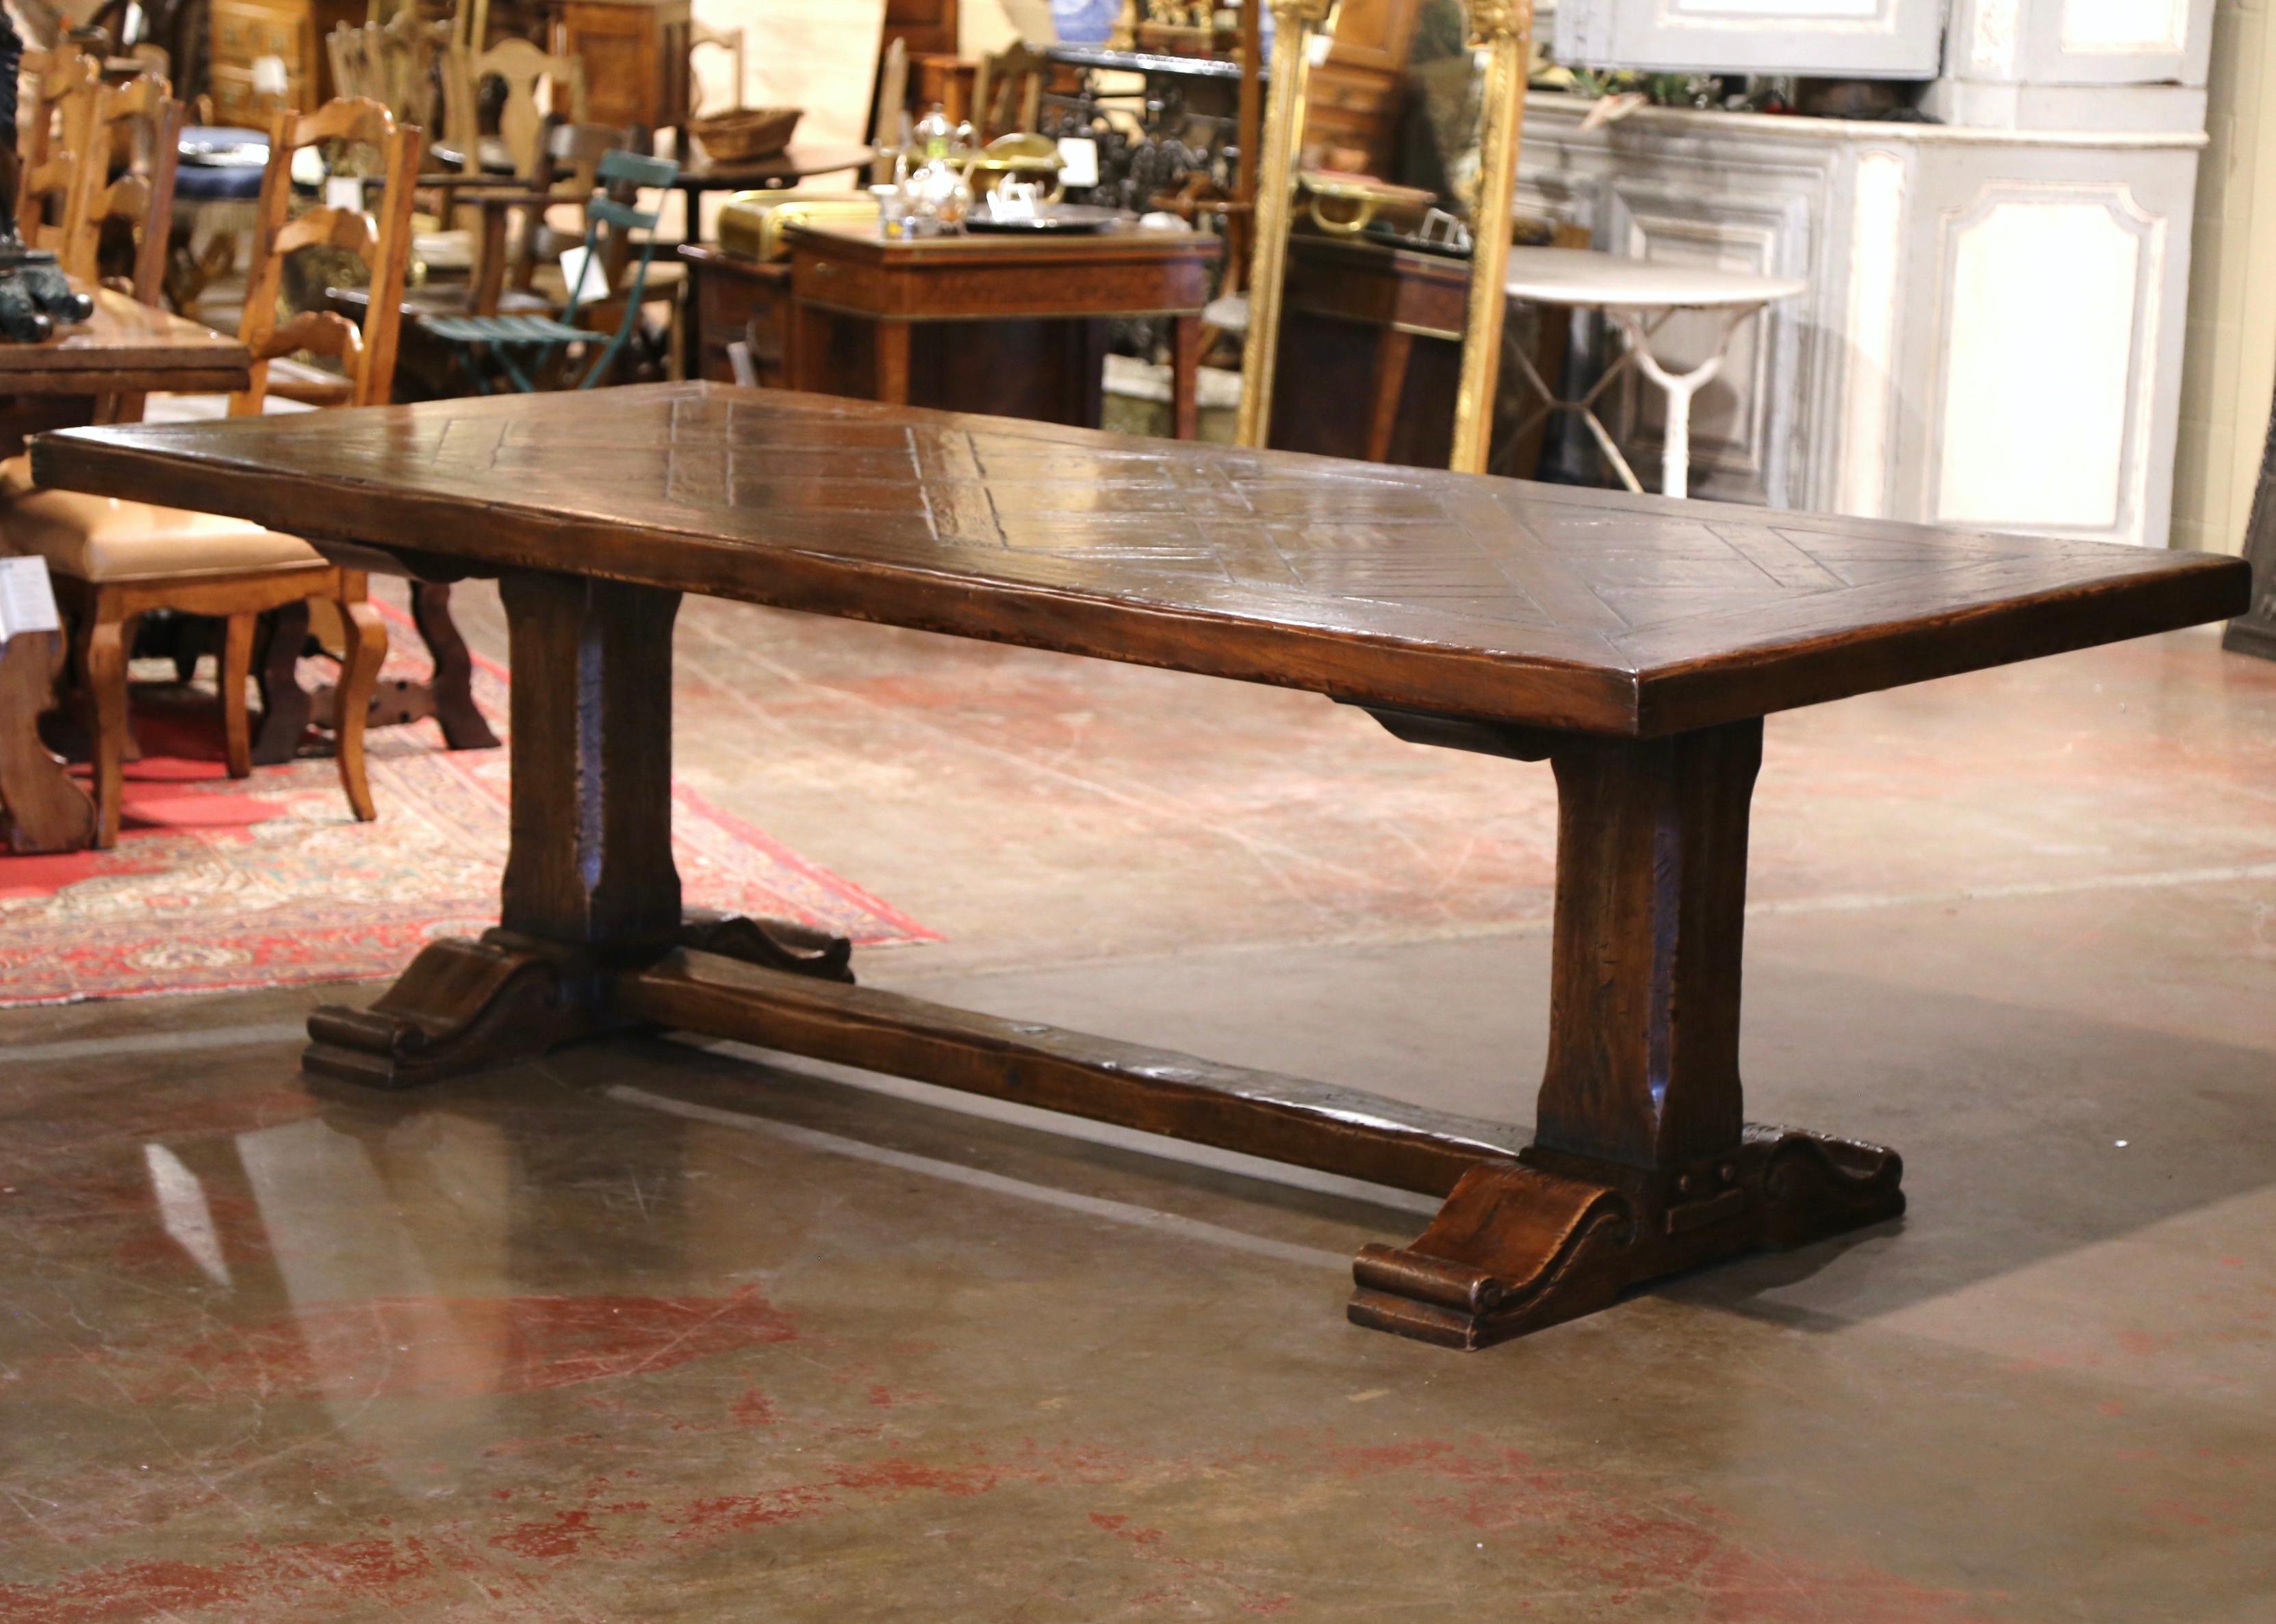 This large 8 feet long fruitwood dining table was crafted in southwest France, near the Spanish and French border circa 1970. Built with antique and reclaimed old timbers of different species, the heavy table stands on a trestle base, supported with